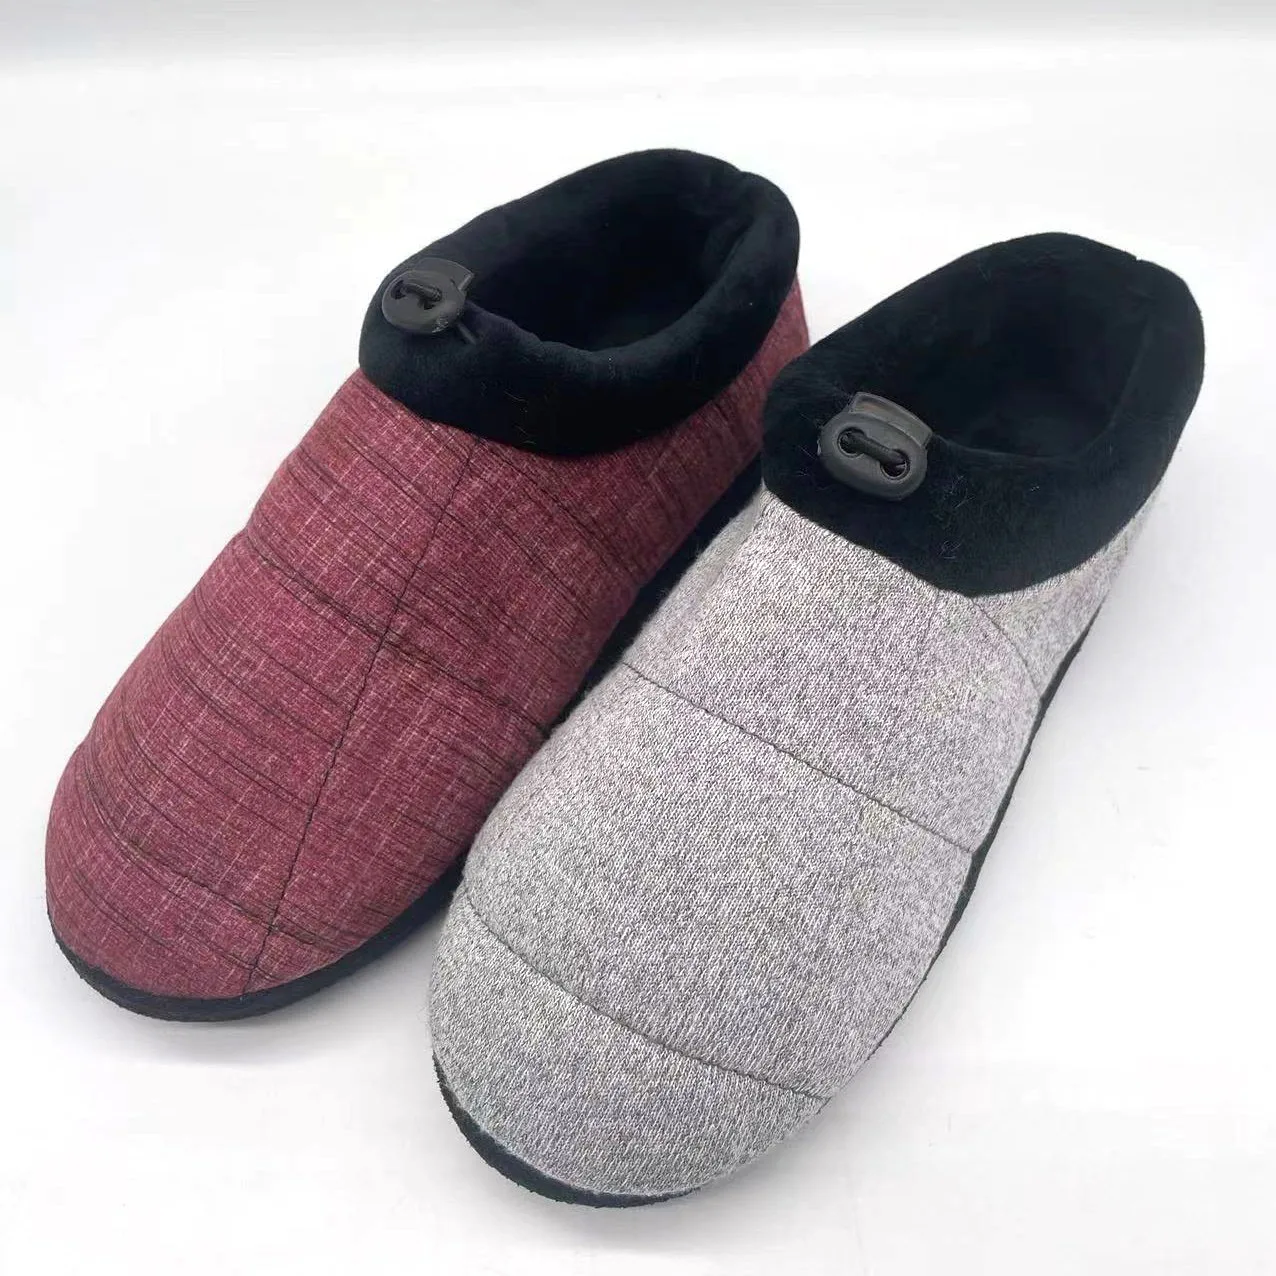 Mens Grid Textured Two Tone Mule Slippers Sizes 7-12 Fleece Lined Winter Warm 